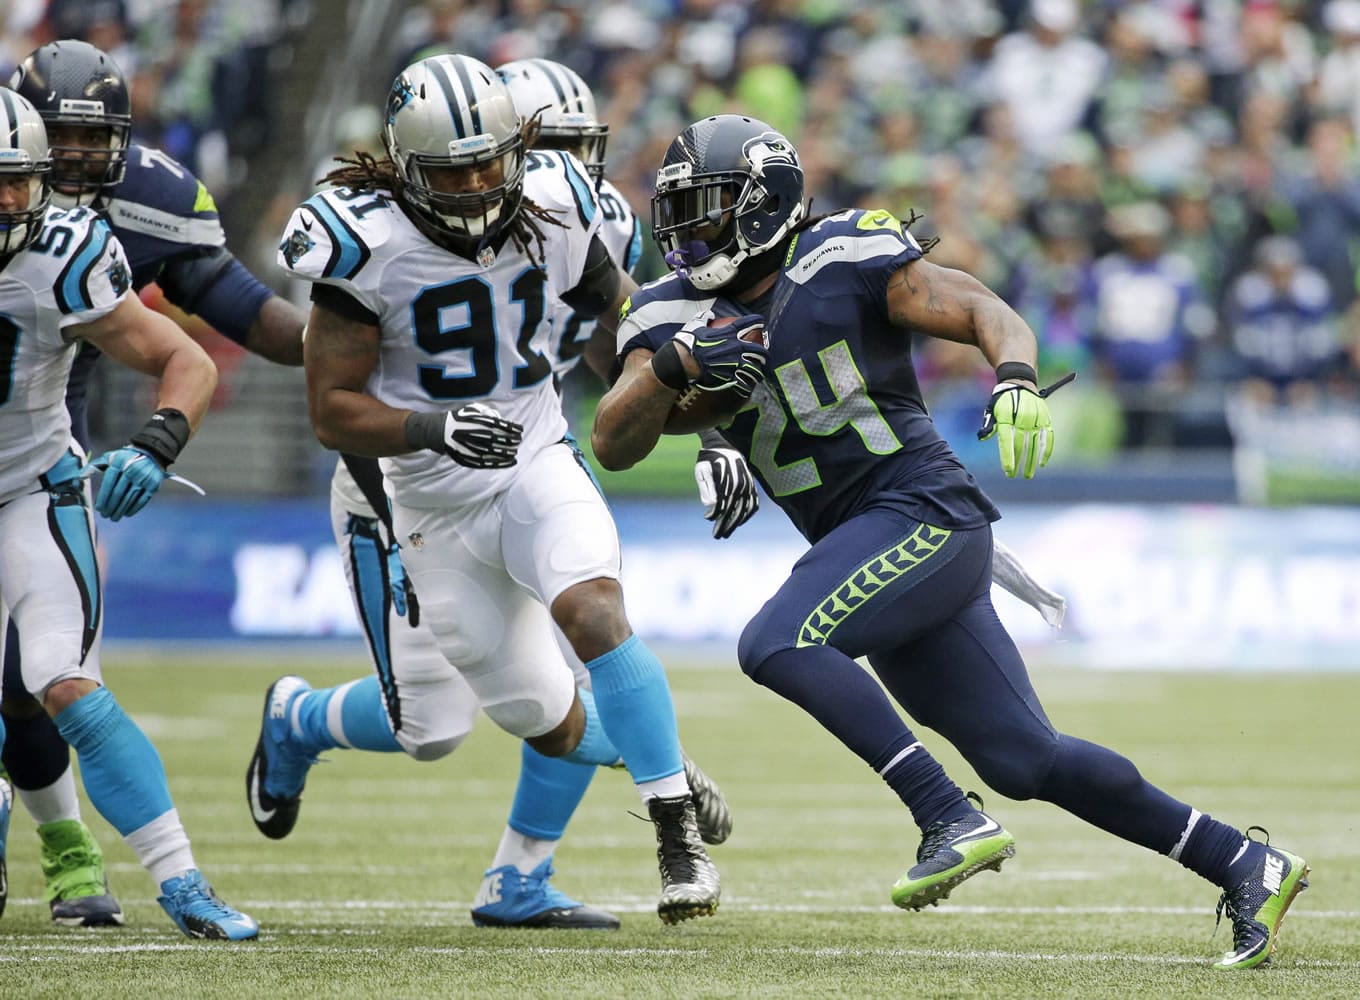 Seattle Seahawks running back Marshawn Lynch rushes against Carolina Panthers' Ryan Delaire (91) in the second half of an NFL football game, Sunday, Oct. 18, 2015, in Seattle.